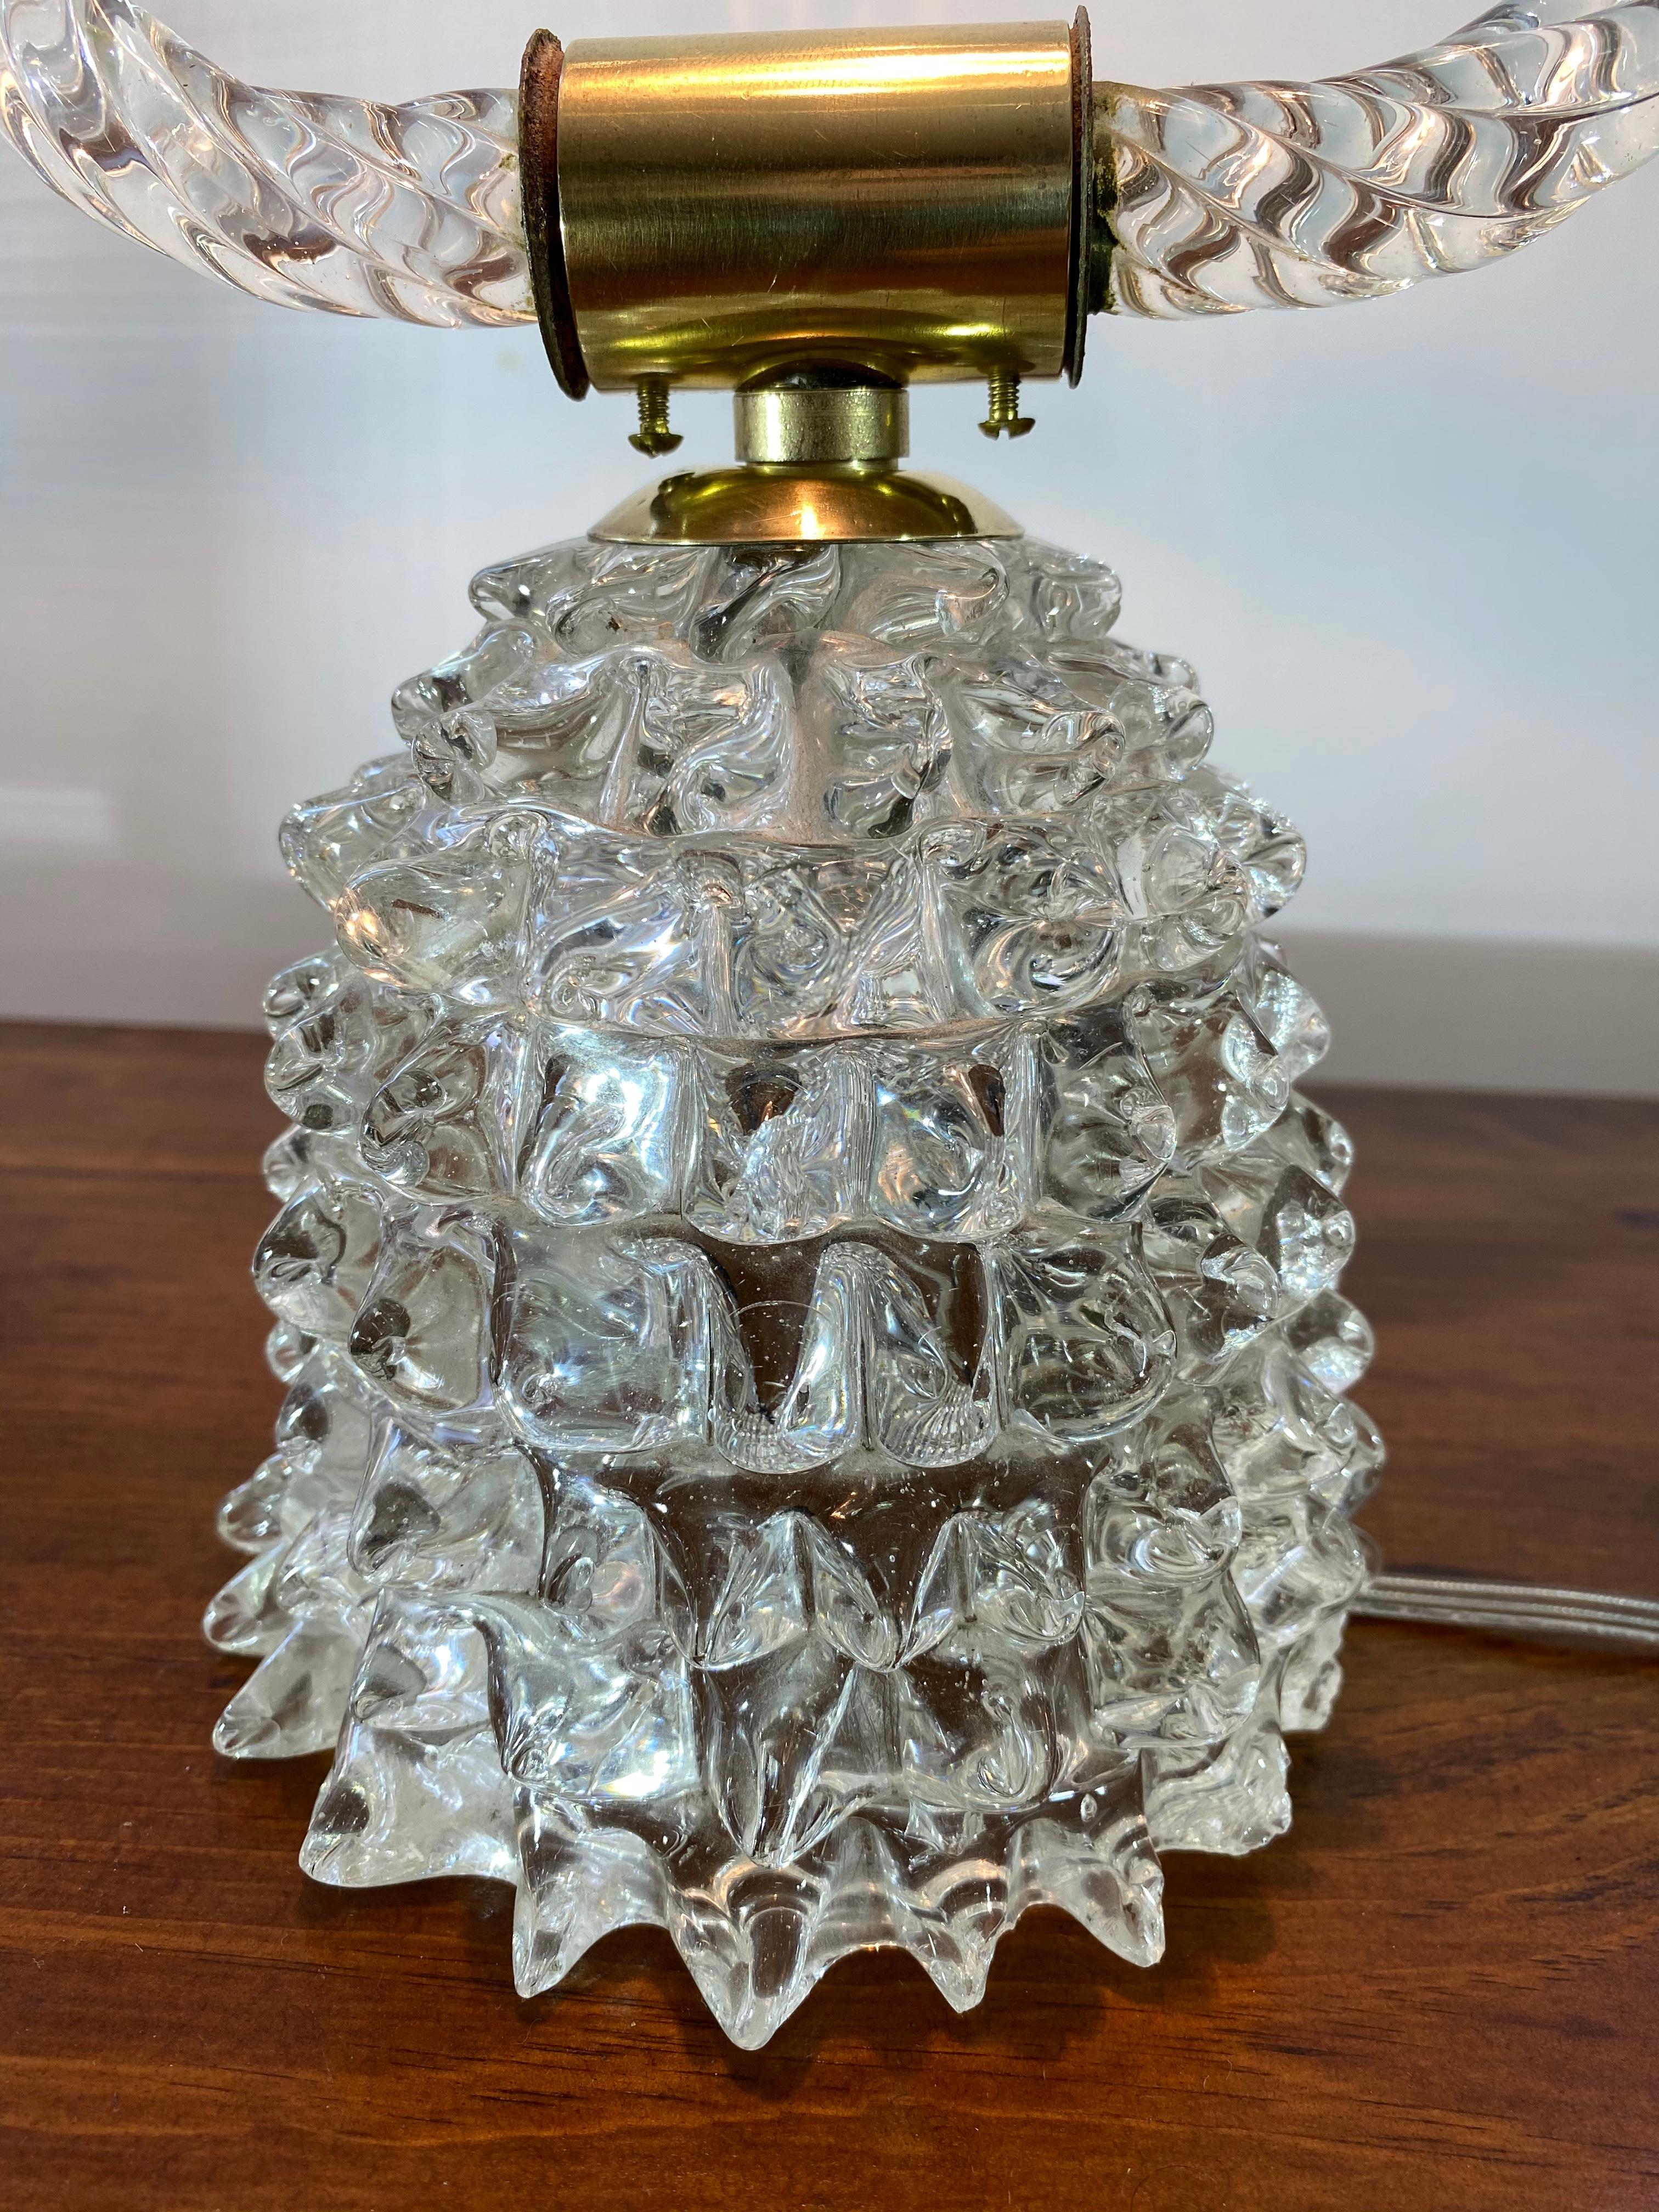 Hand-Crafted Art Deco Table Lamp by Ercole Barovier, Murano, 1940s For Sale